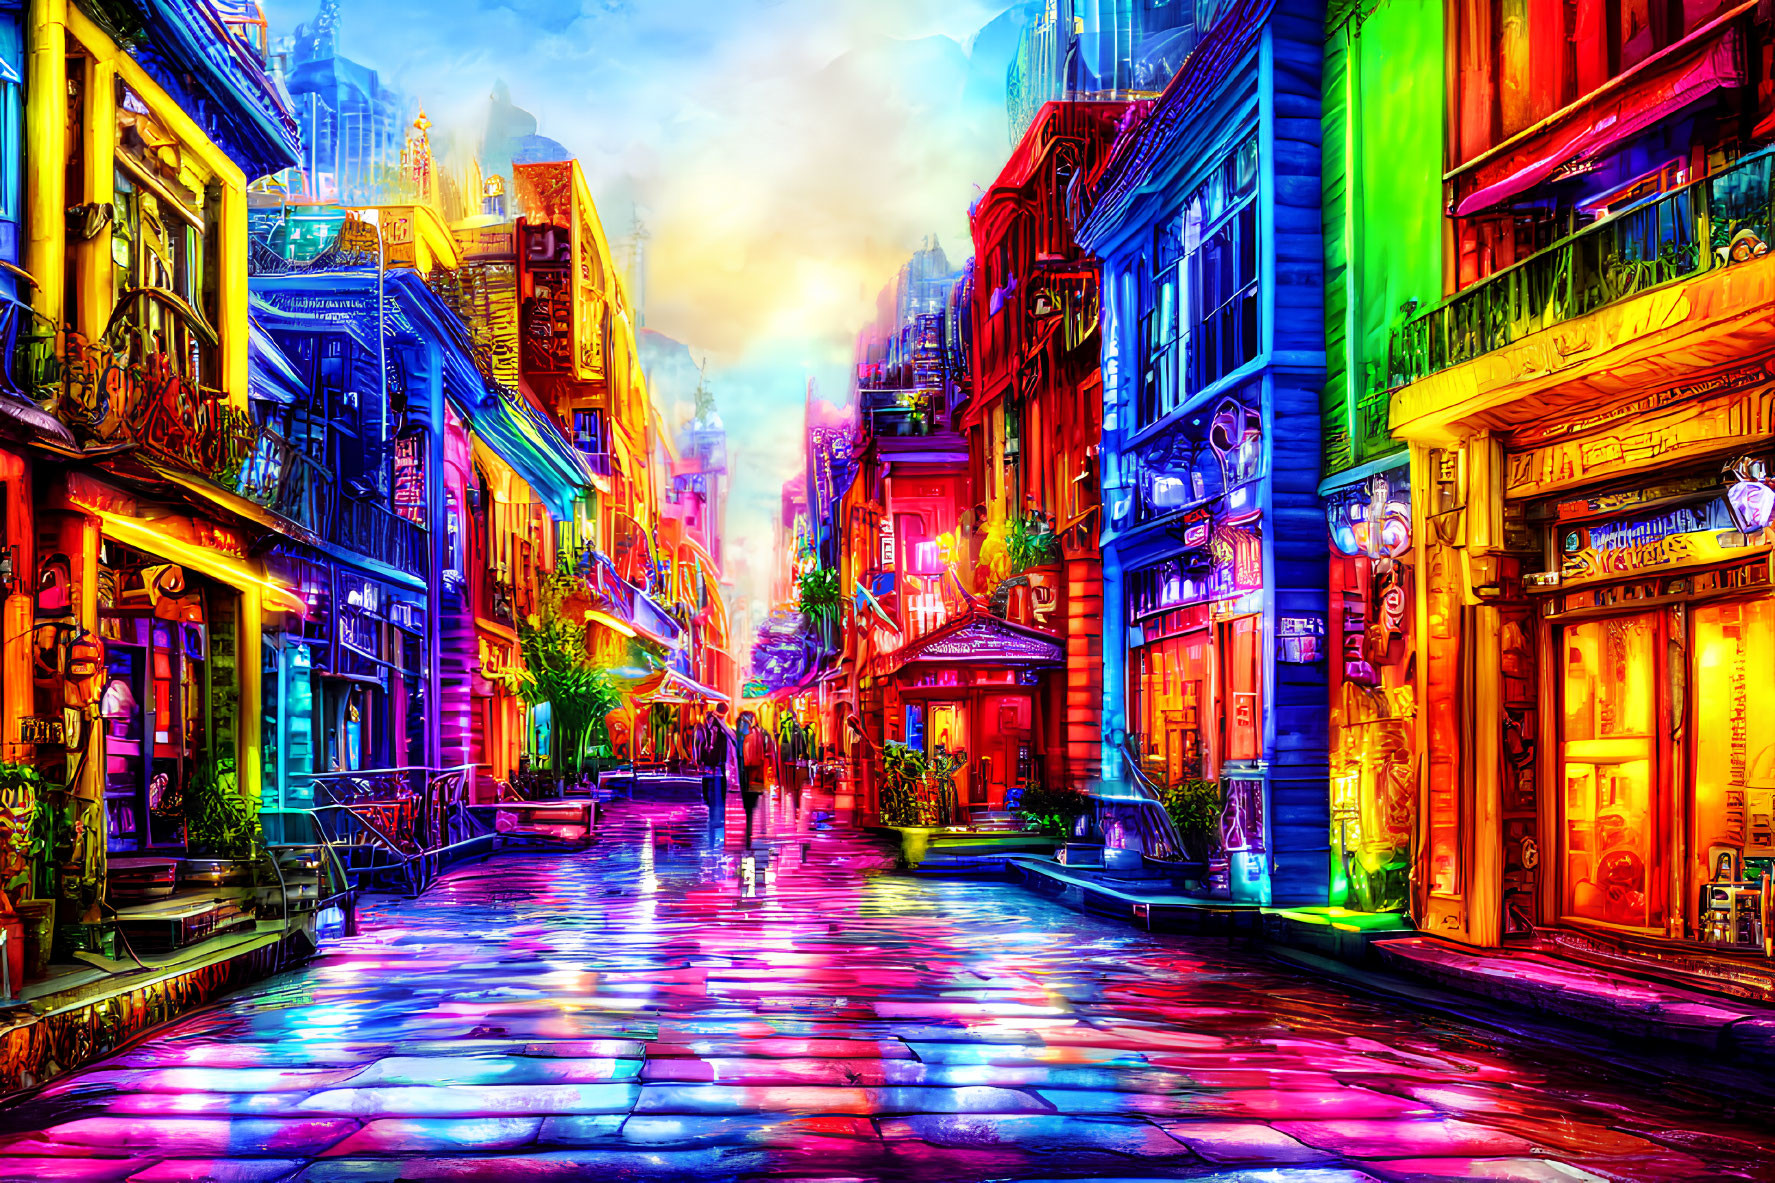 Colorful street scene with eclectic architecture and luminous sky